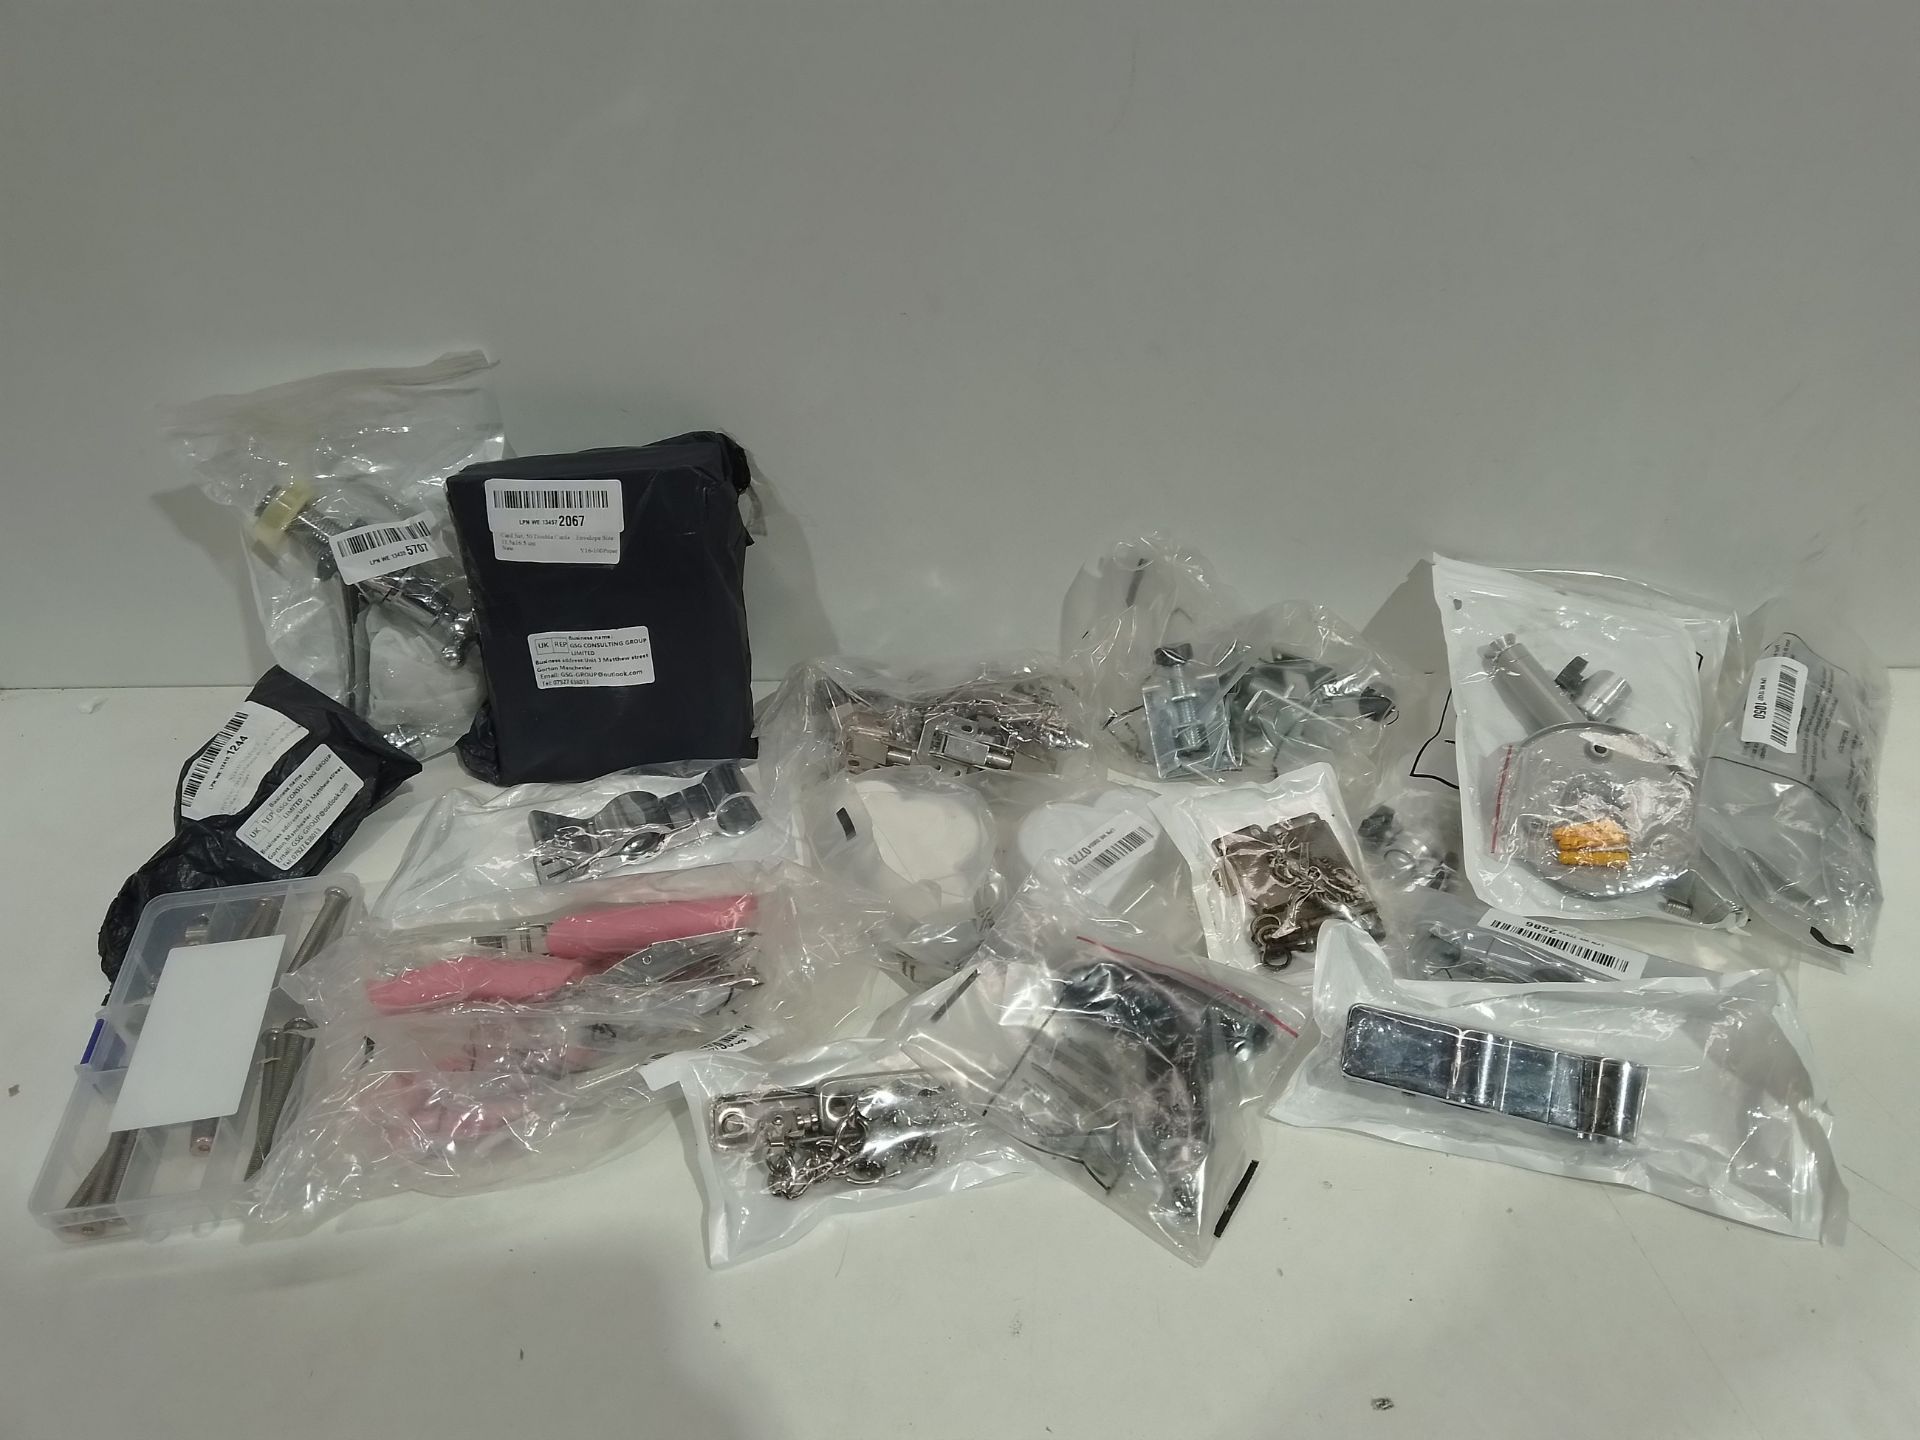 RRP £181.29 Total, Lot consisting of 16 items - See description. - Image 2 of 14